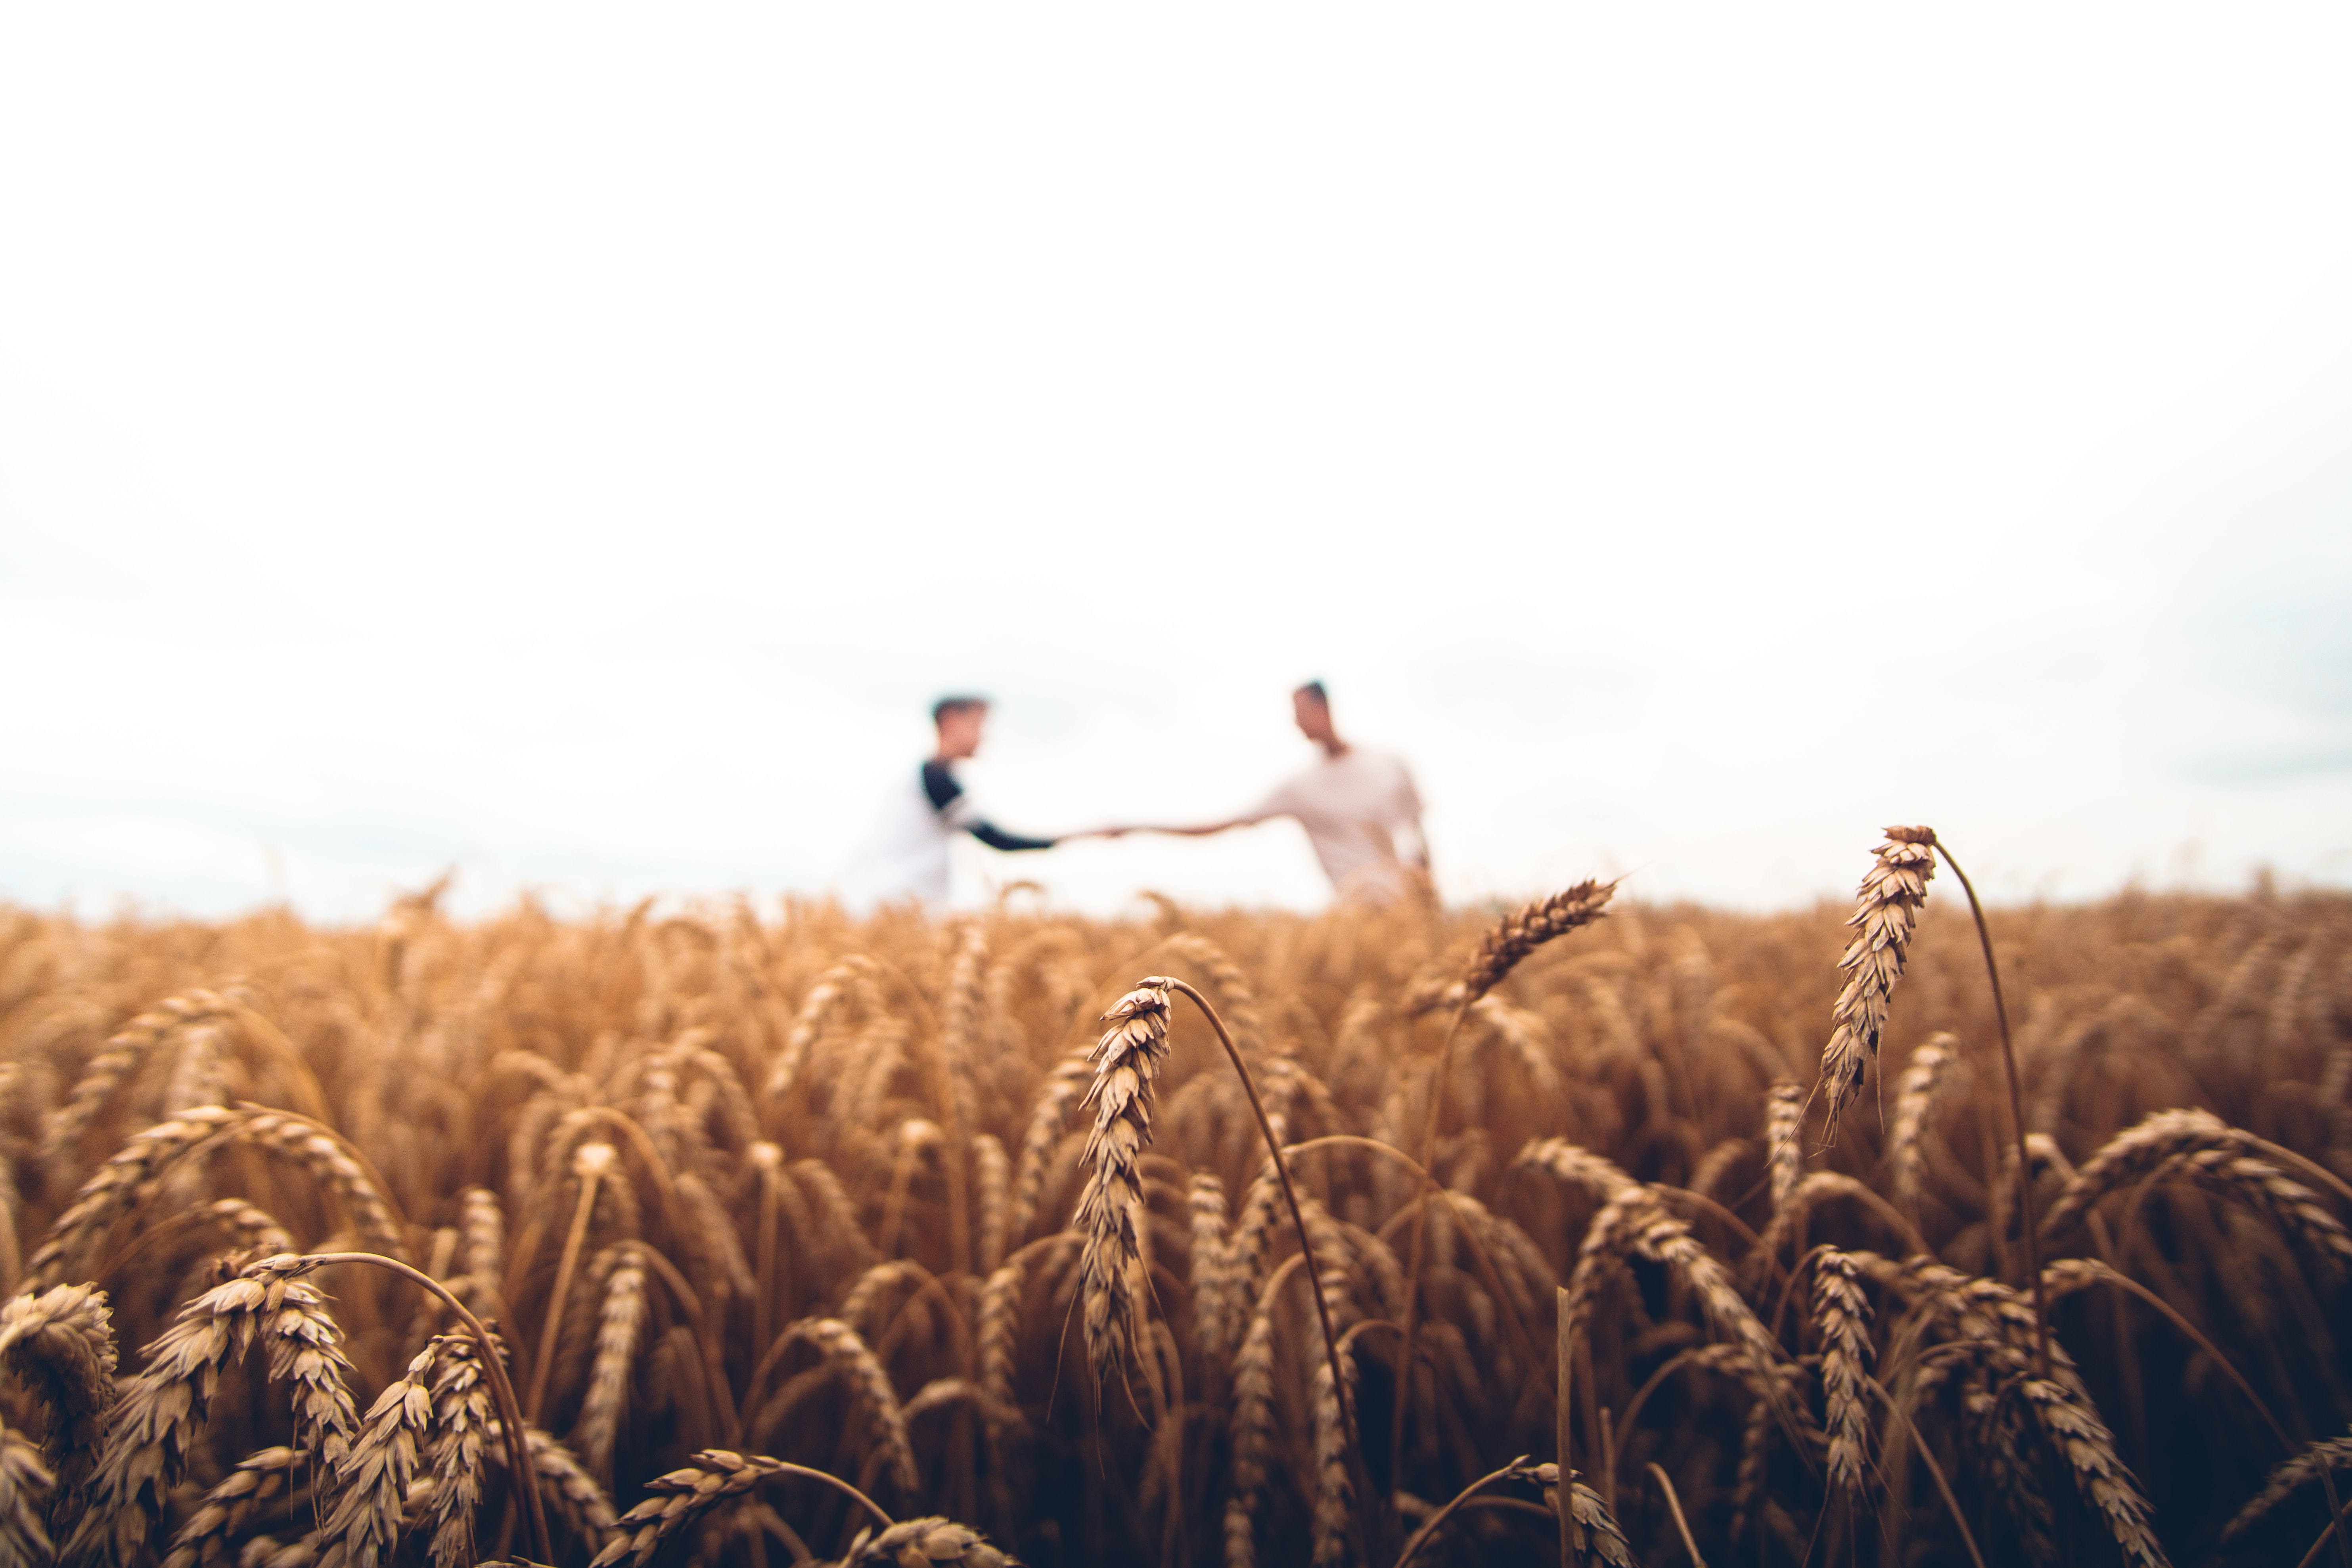 Two people shaking hands in a wheat field.